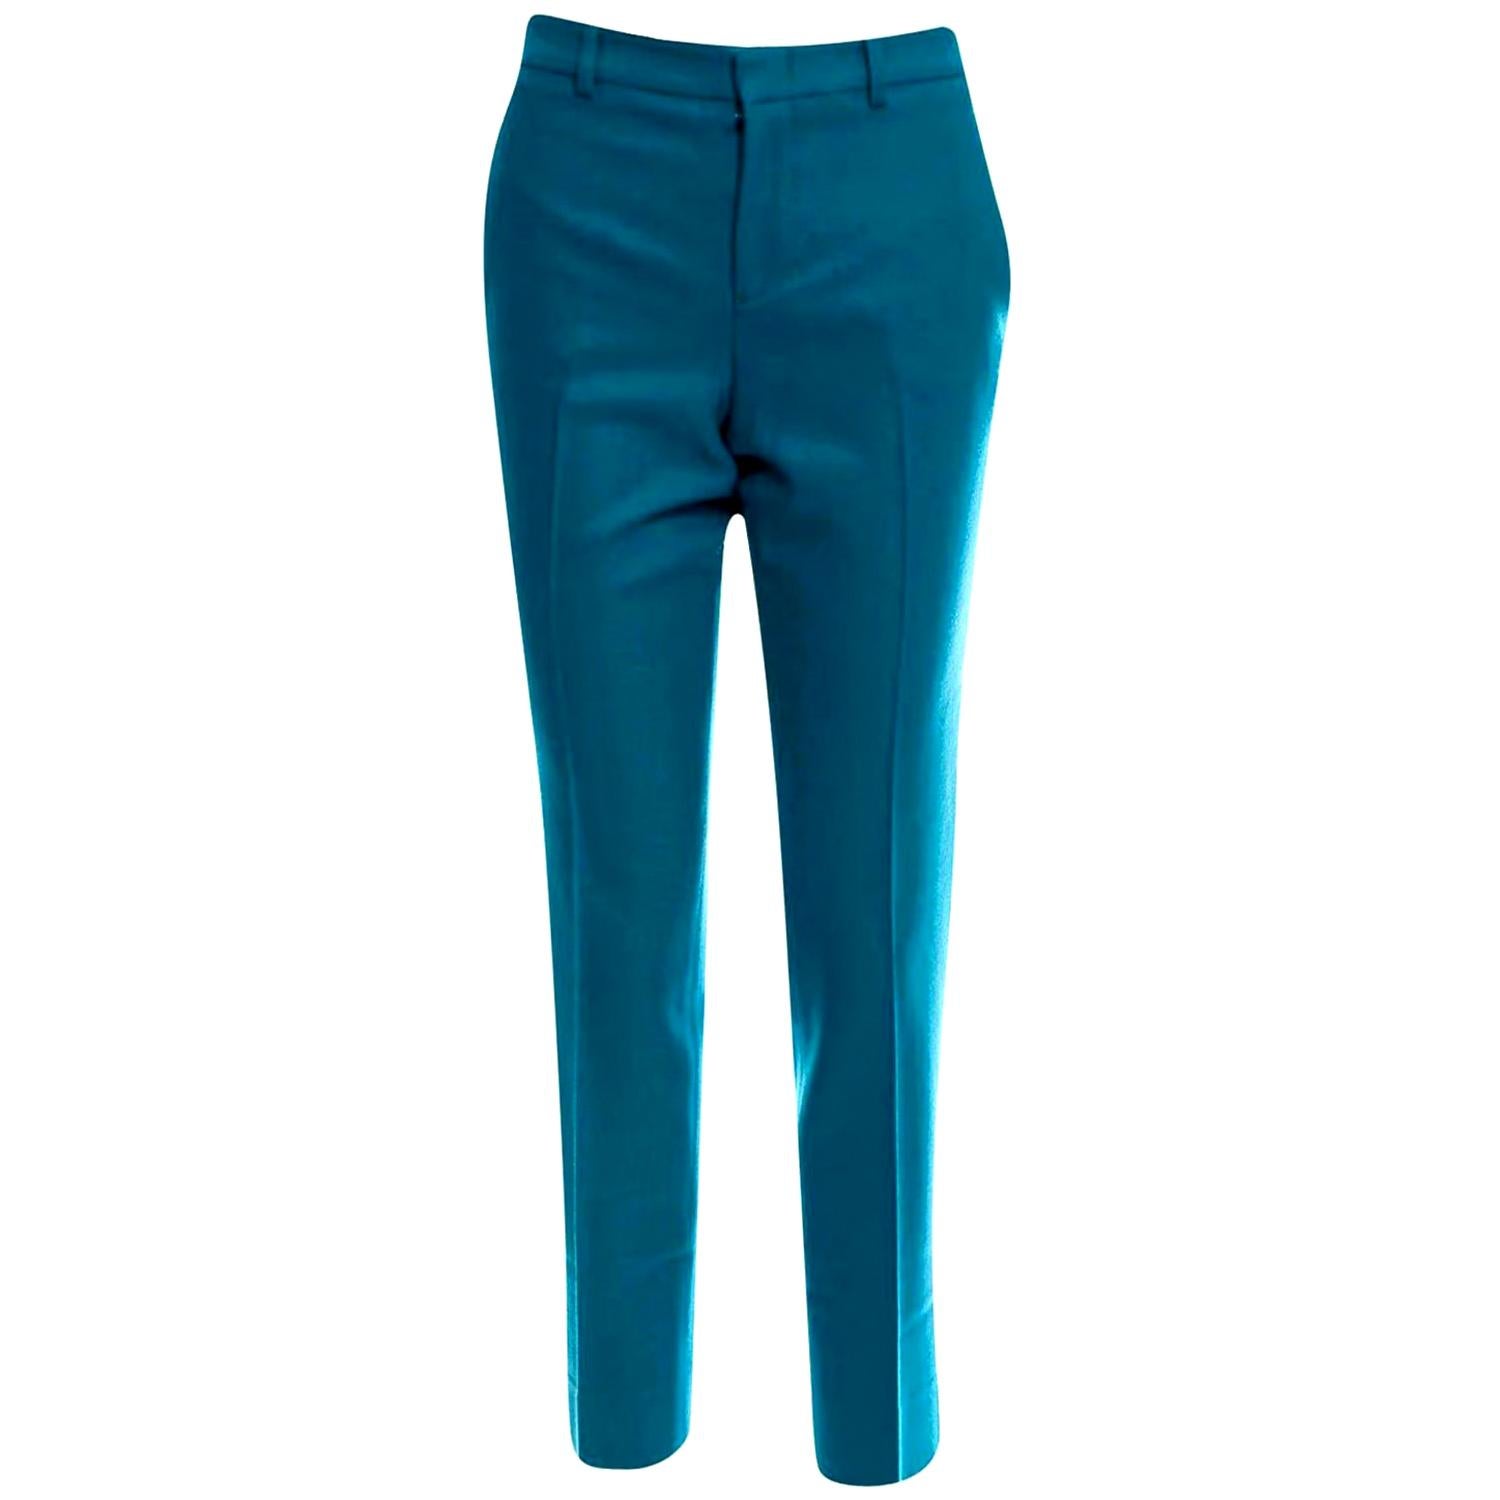 New Gucci Teal Wool & Cashmere Pre Fall 2013 Pants Sz 40